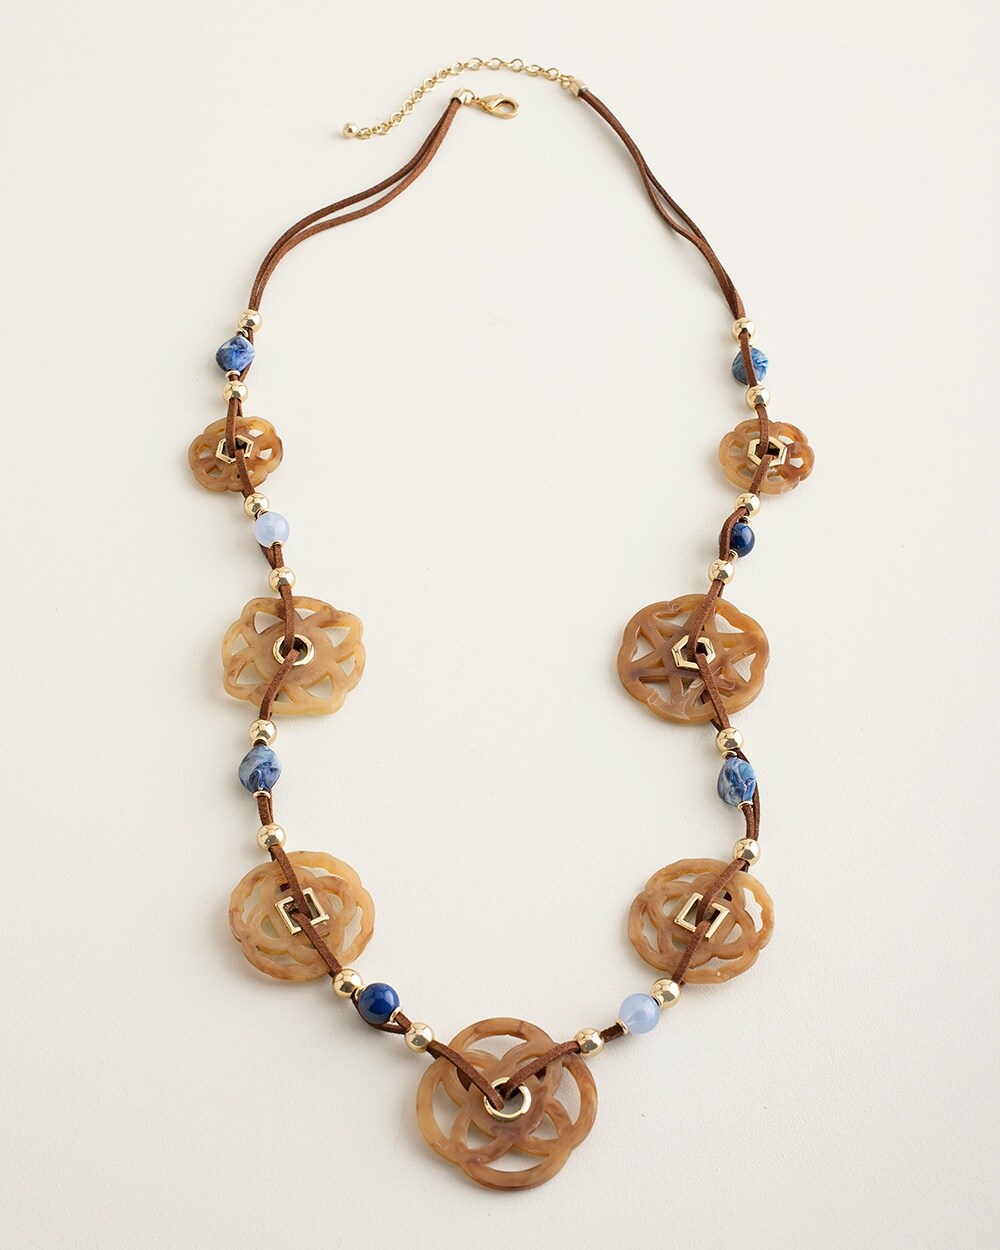 Long Blue and Neutral Single-Strand Necklace